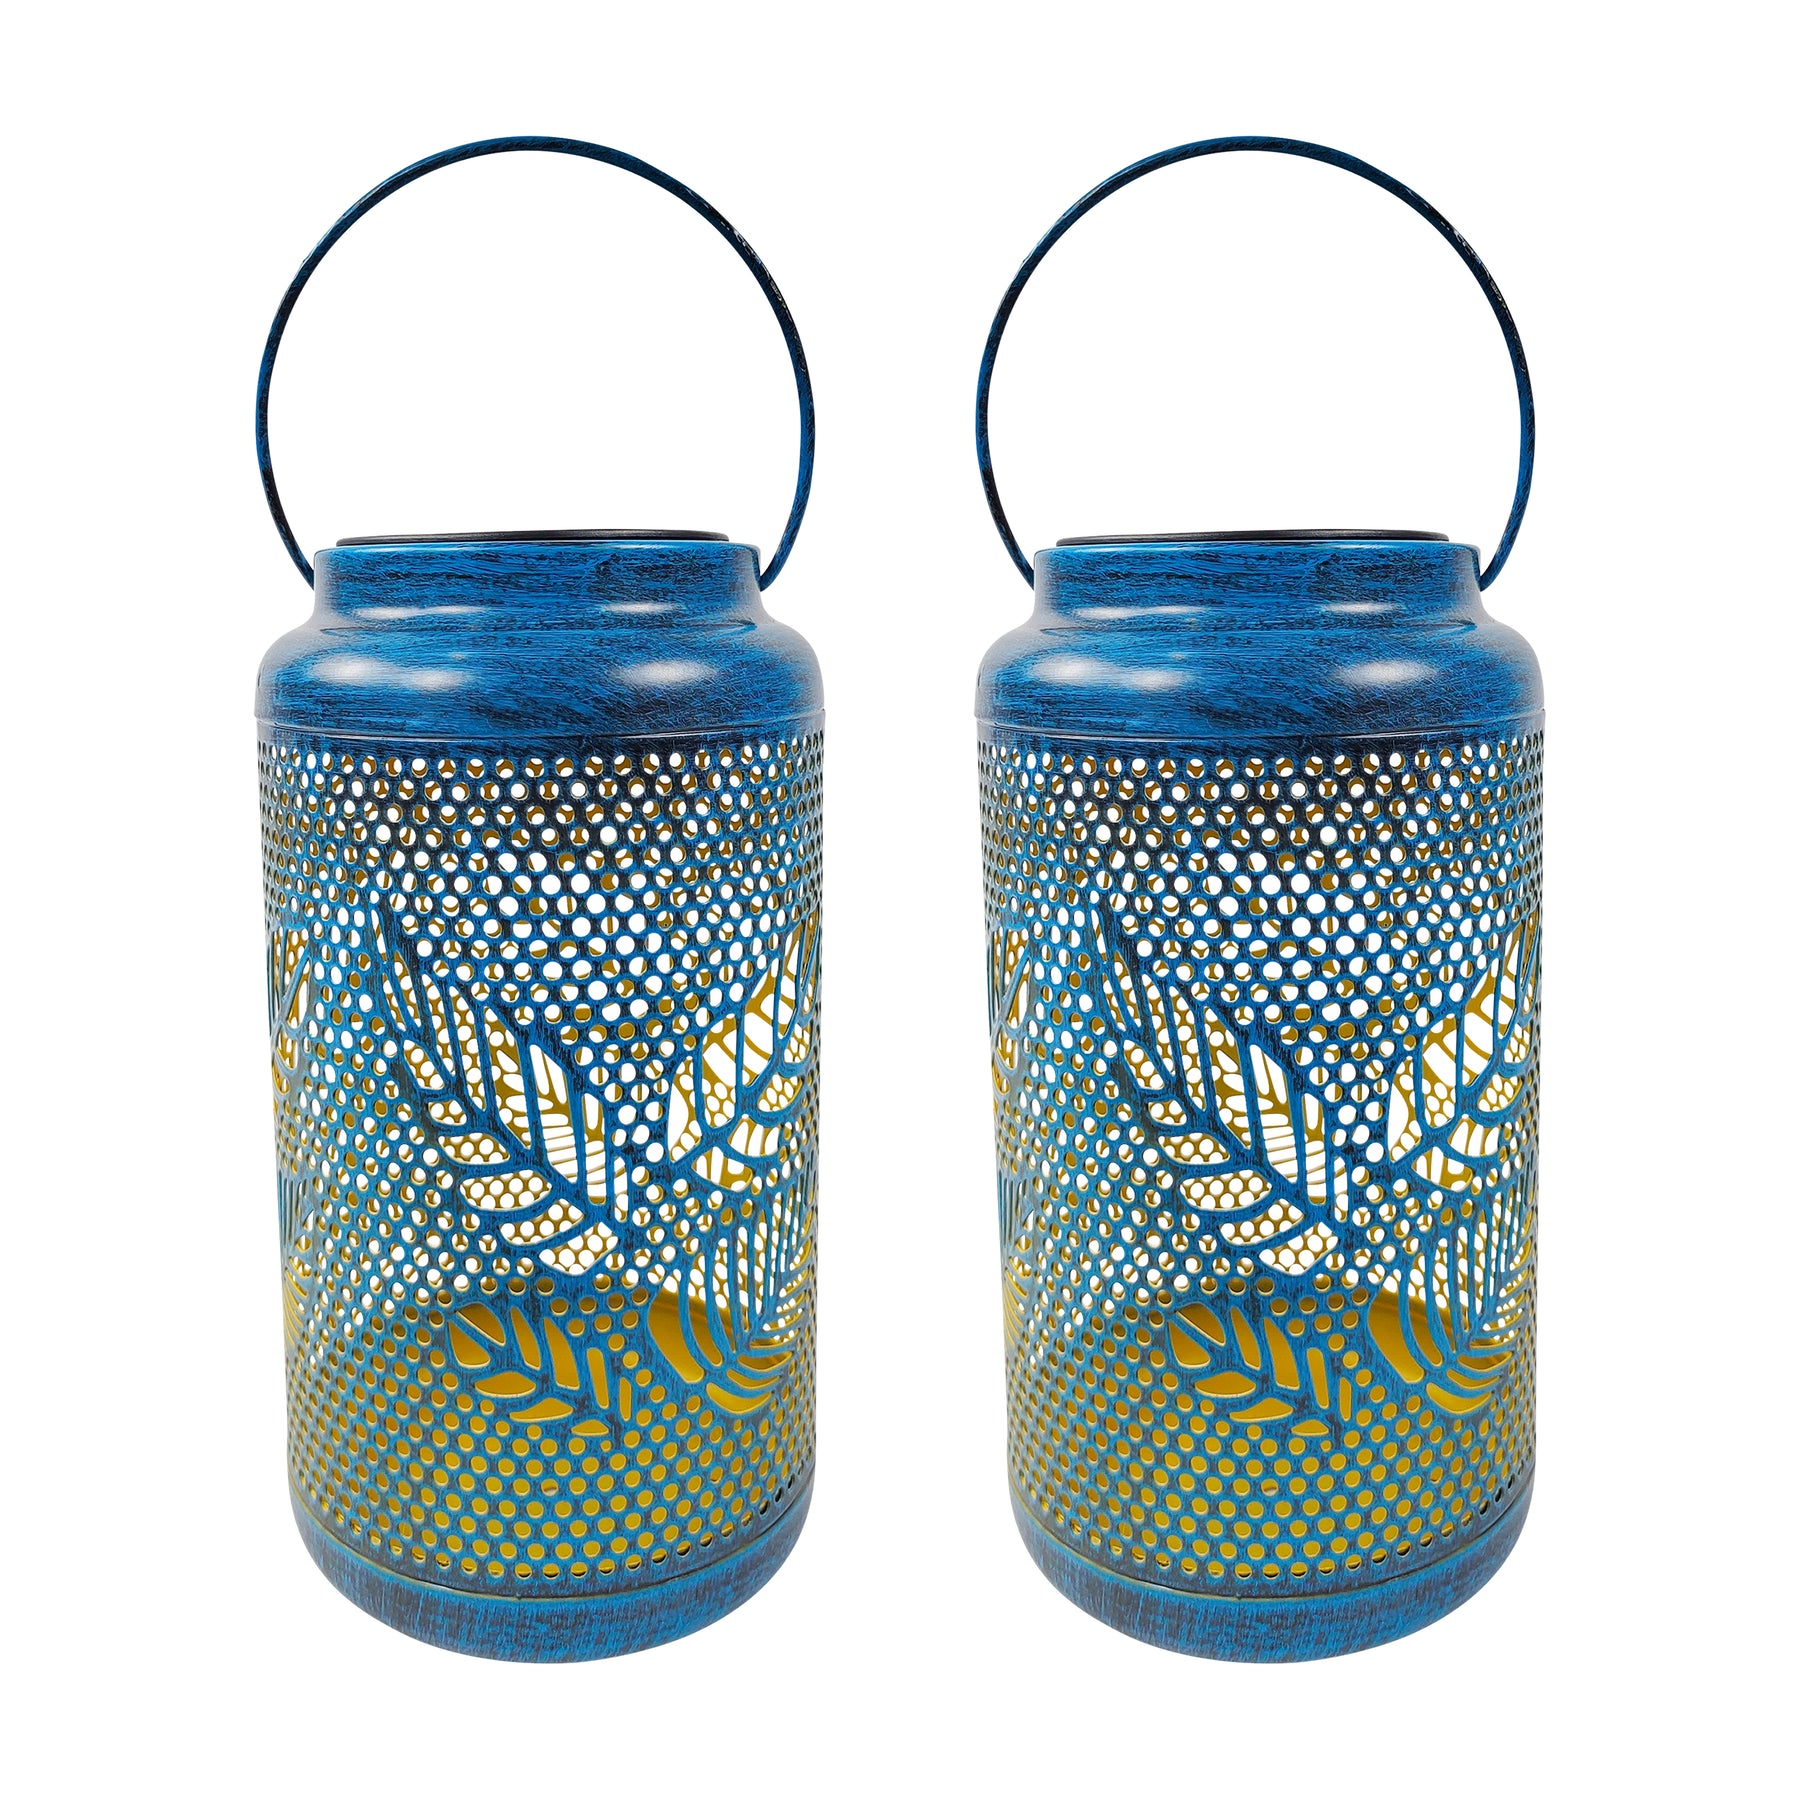 Bliss Outdoors 9-inch Tall 2-Pack Hanging and Tabletop Decorative Solar LED Lantern with Unique Berry Leaf Design and Antique Hand Painted Finish in the Brushed Blue Variation.